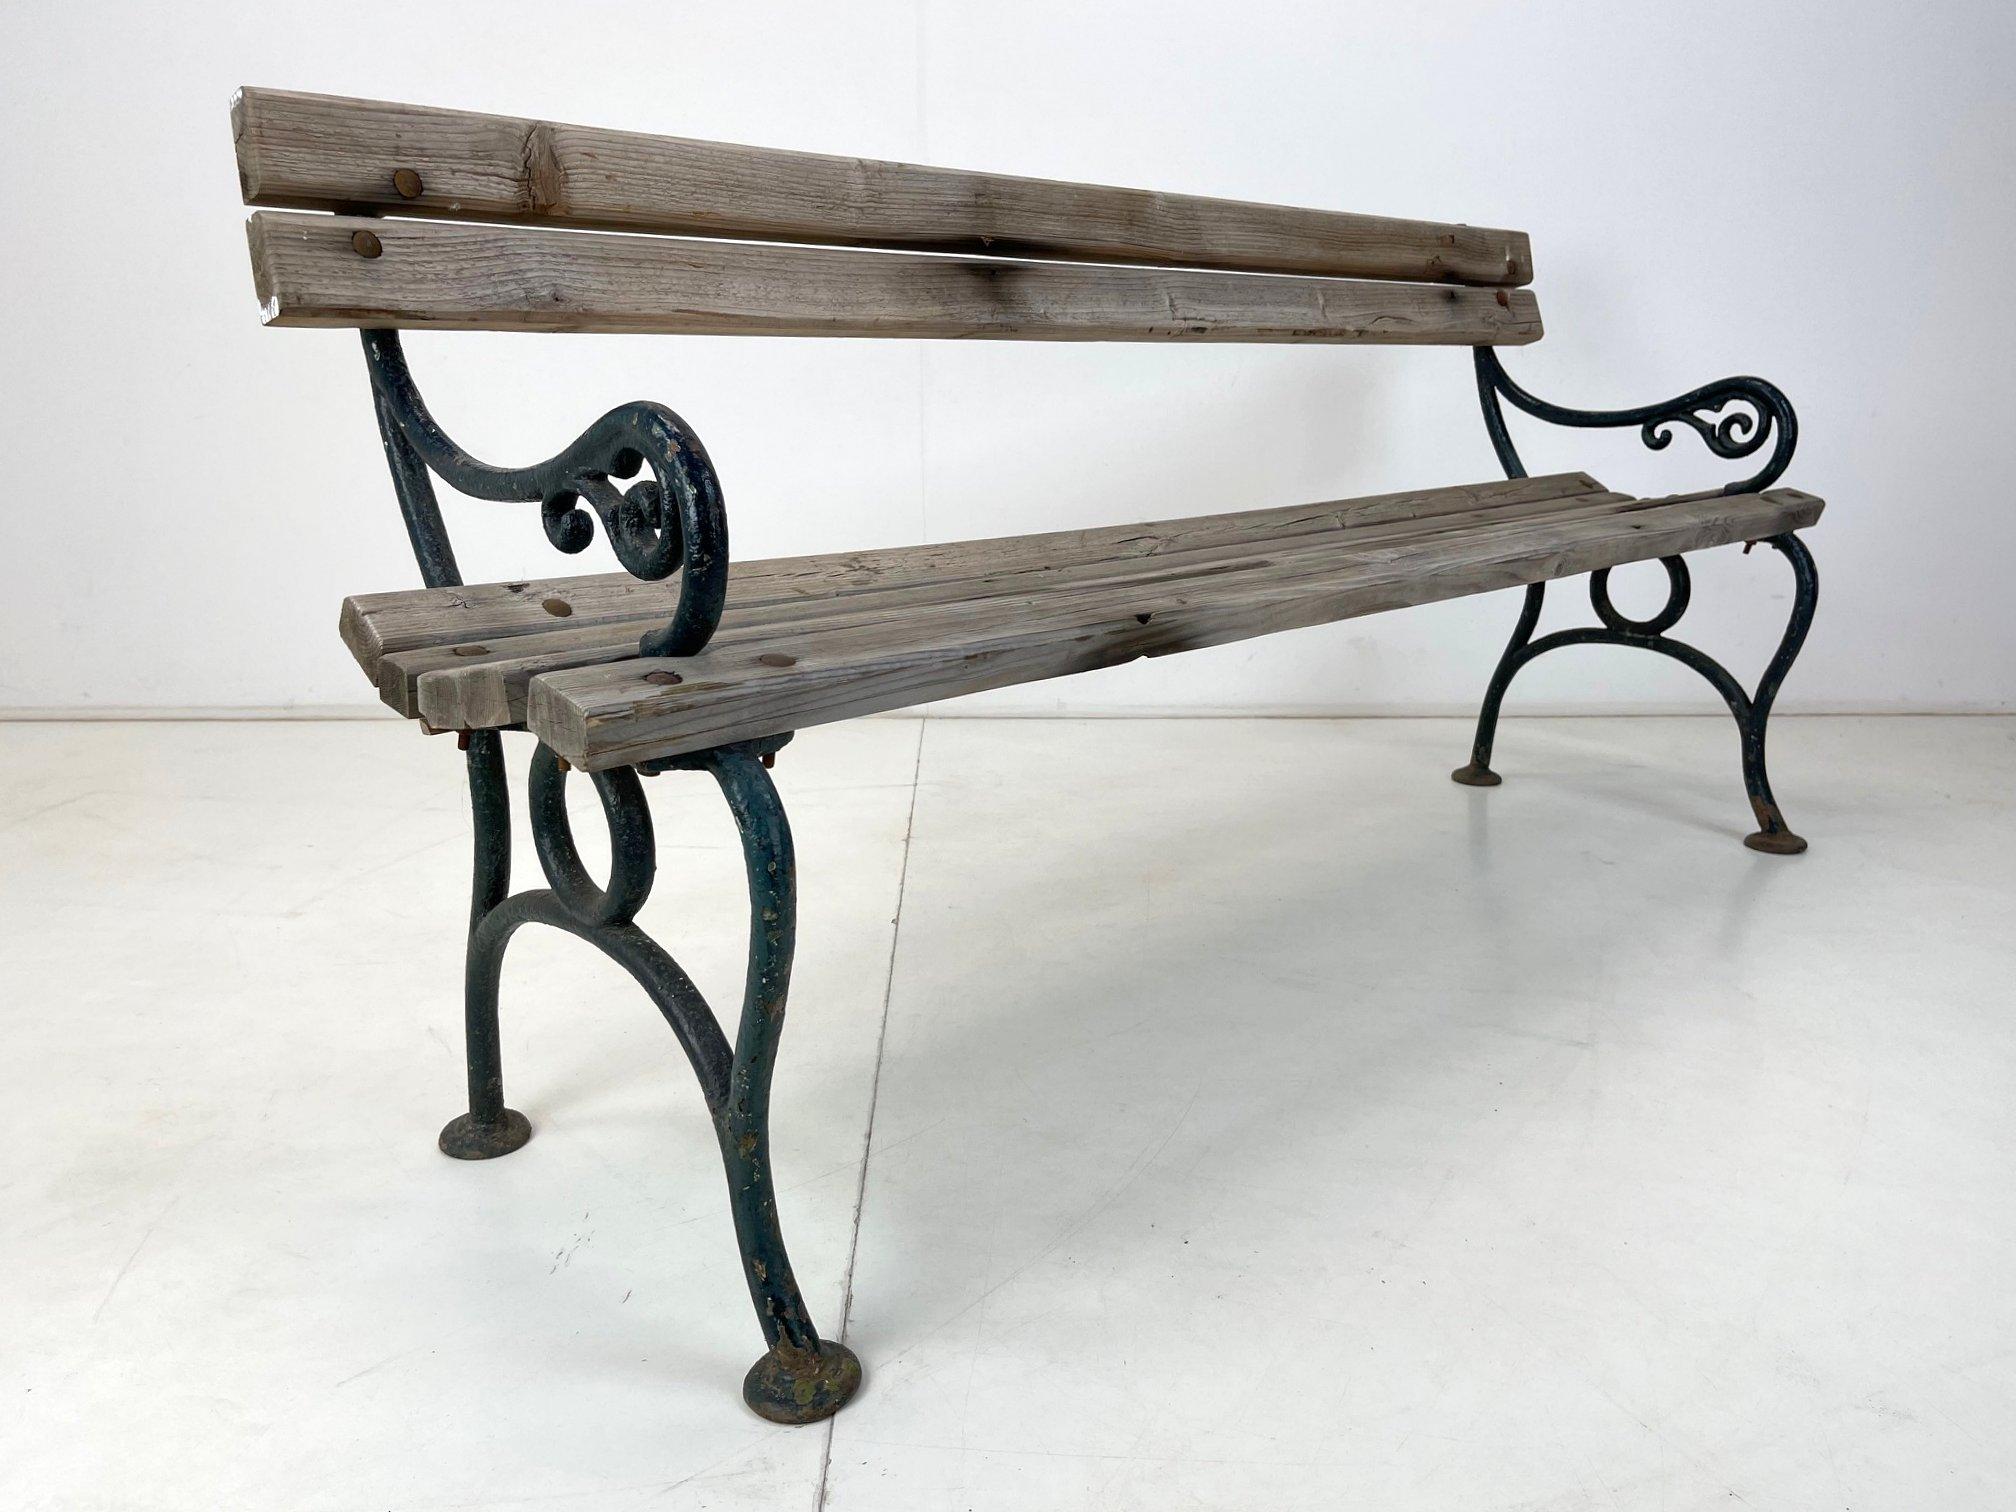 Beautiful antique cast iron bench from Eastern Europe in original condition with original patina.